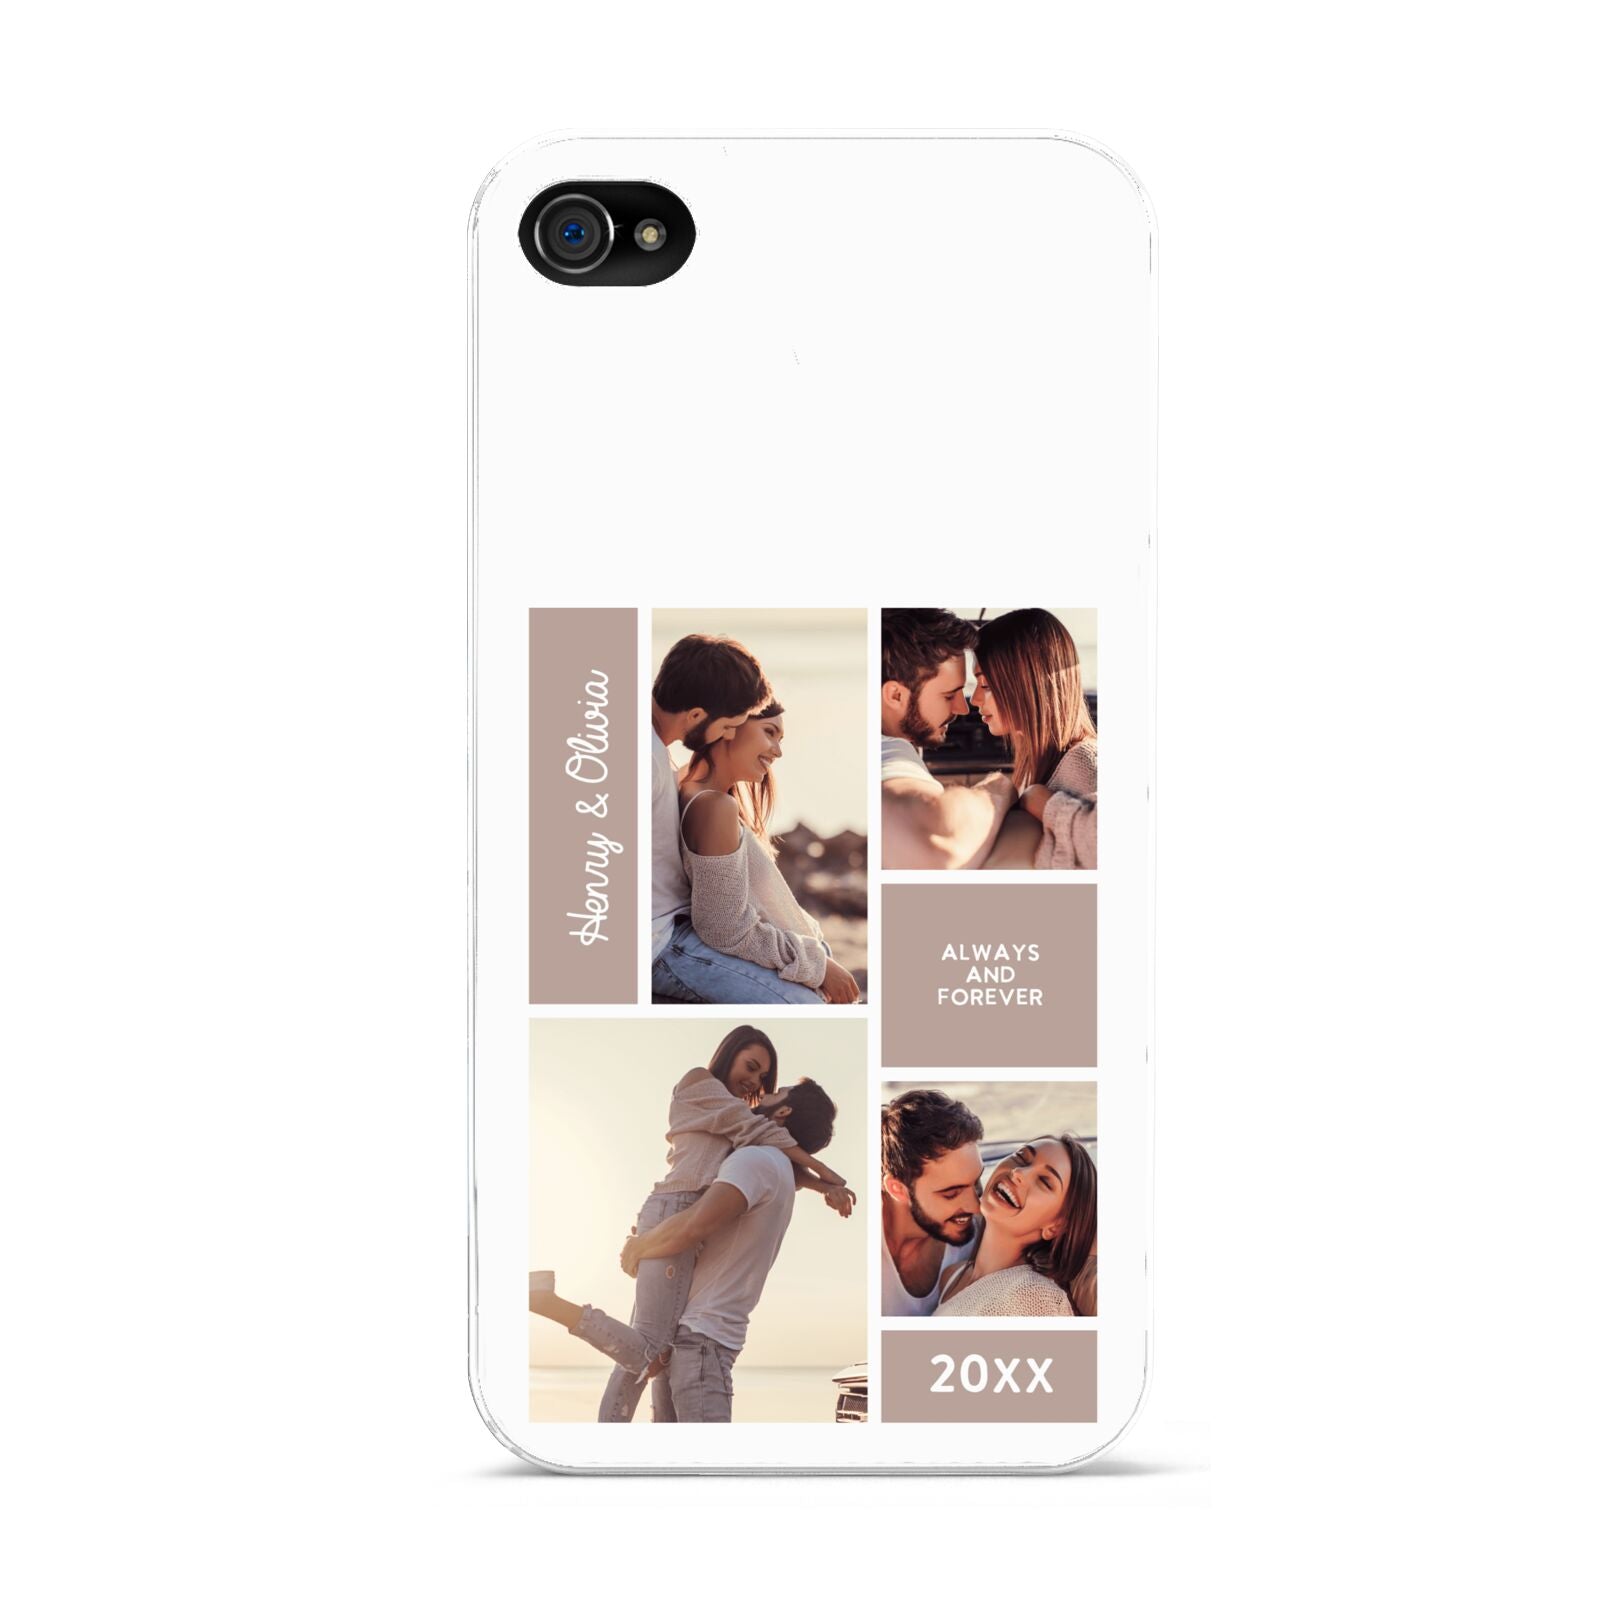 Couples Valentine Photo Collage Personalised Apple iPhone 4s Case